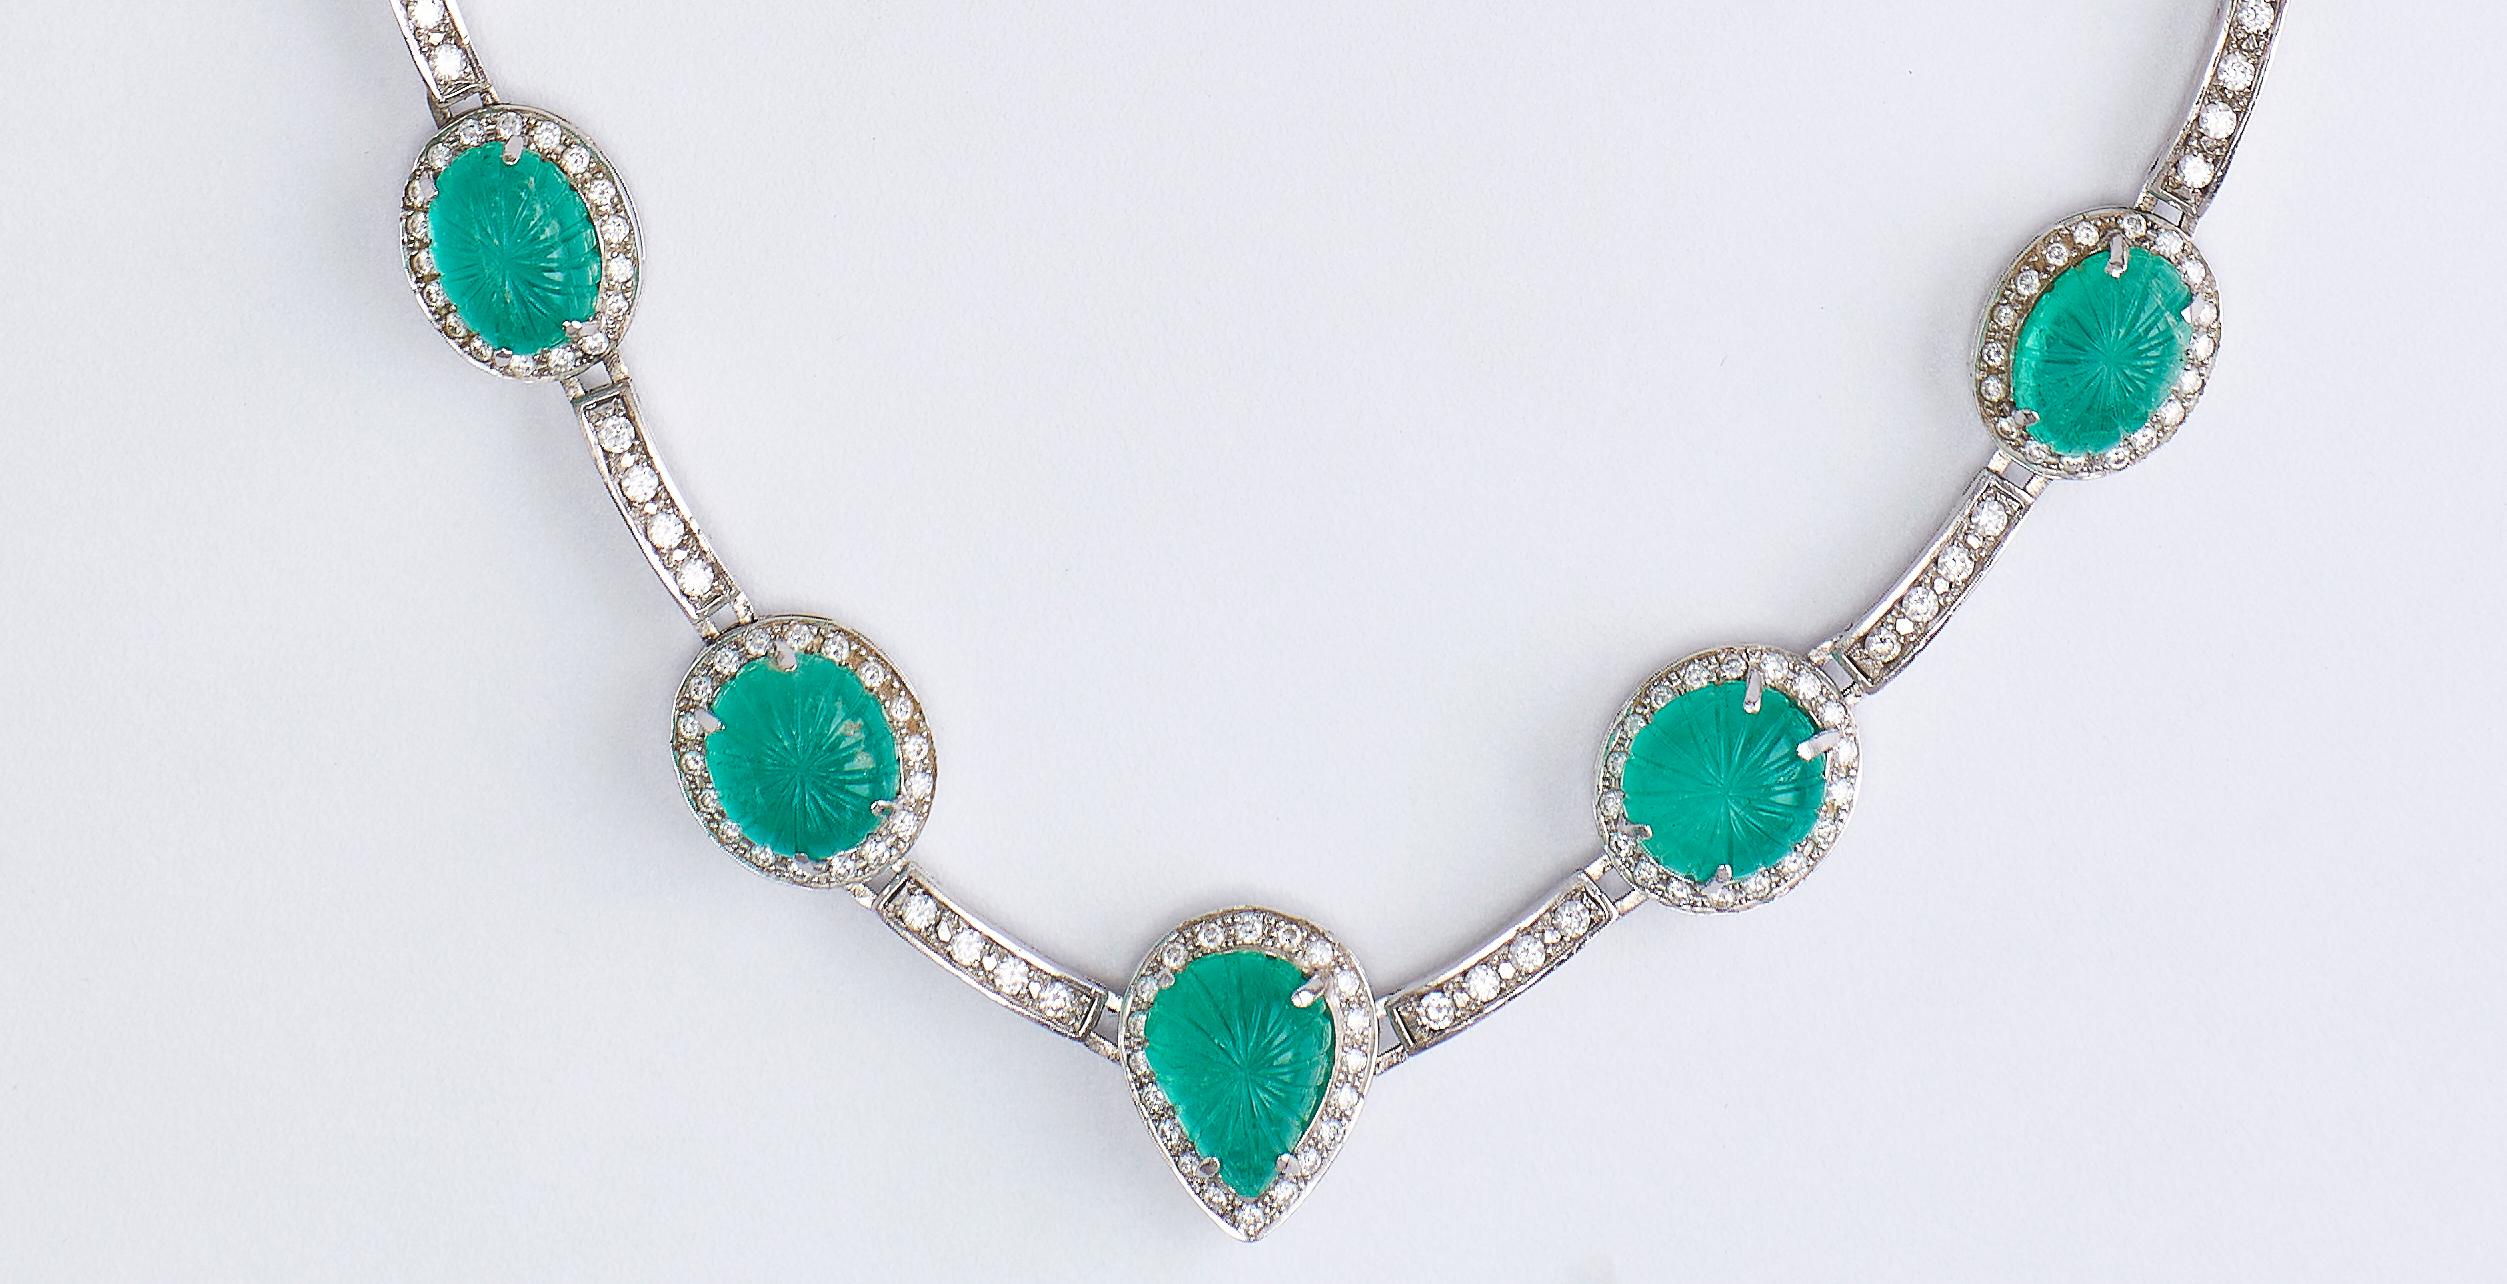 18k White Gold Necklace with Emeralds and Diamonds Certified
Stunning necklace, set with 9 emeralds Cabochon (Pear - Oval - Round) total 39.00 ct emerald. 
Each emerald is surrounded by diamonds and between every 2 stones there are 4 diamonds.
With